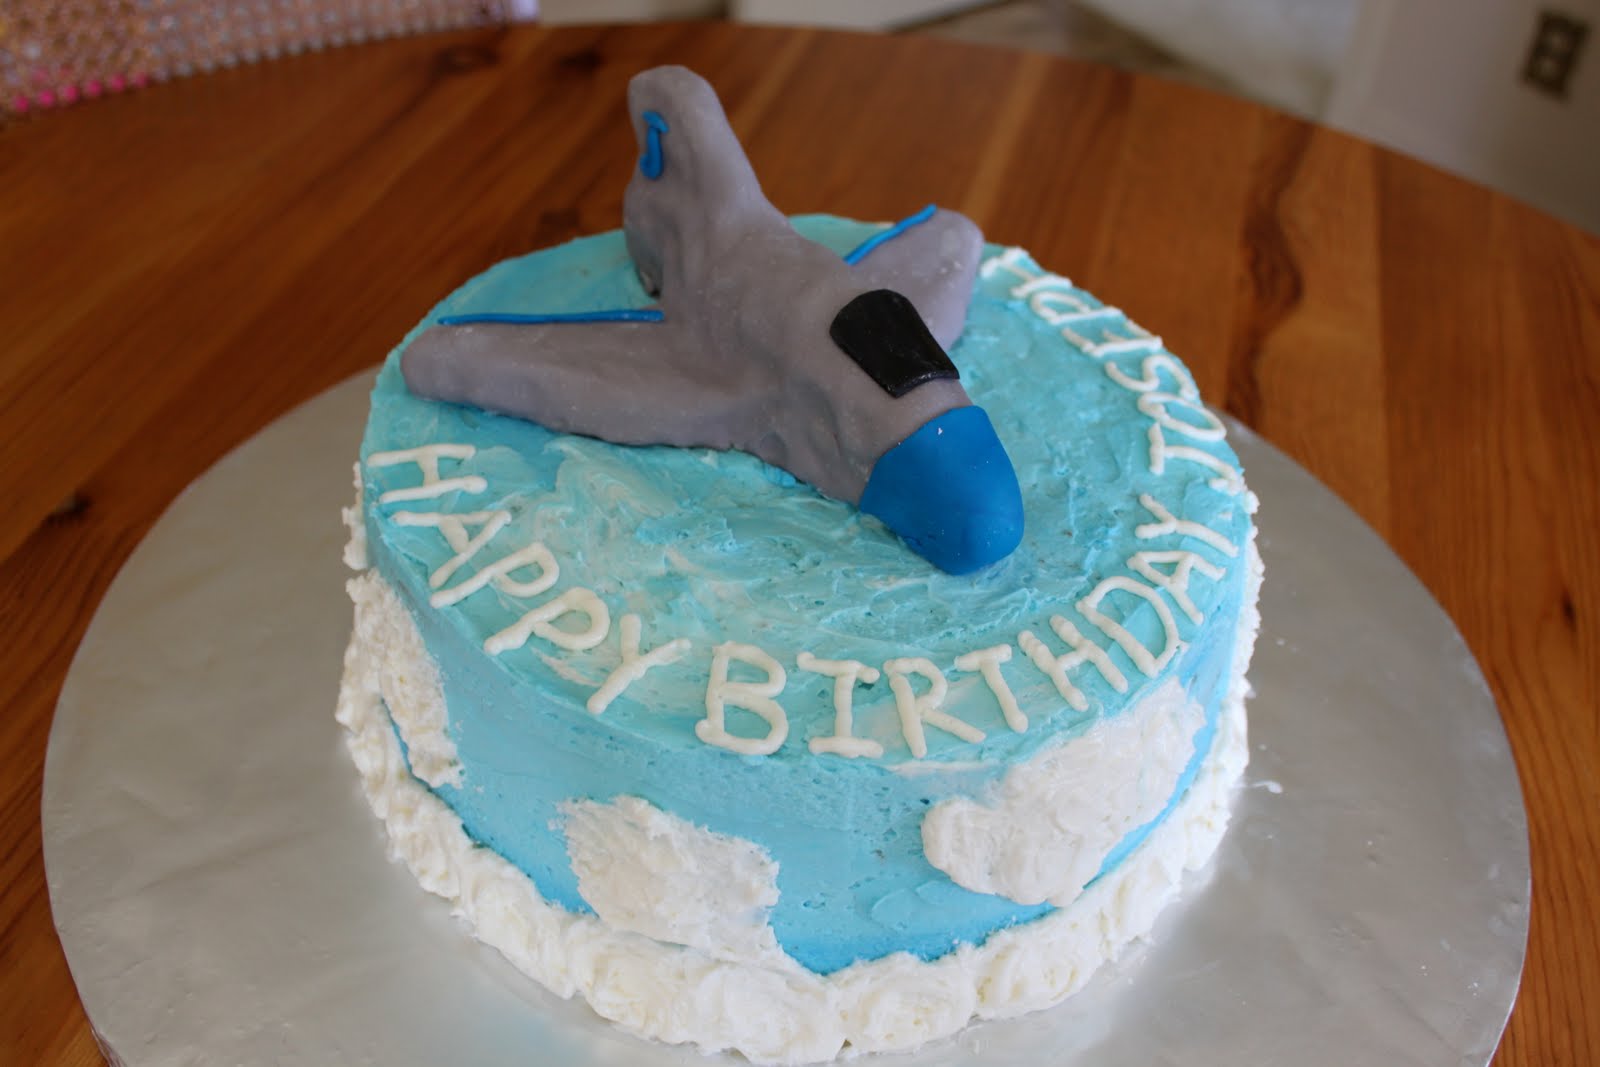 Birthday cakes for boys photo and pictures | Birthday ...